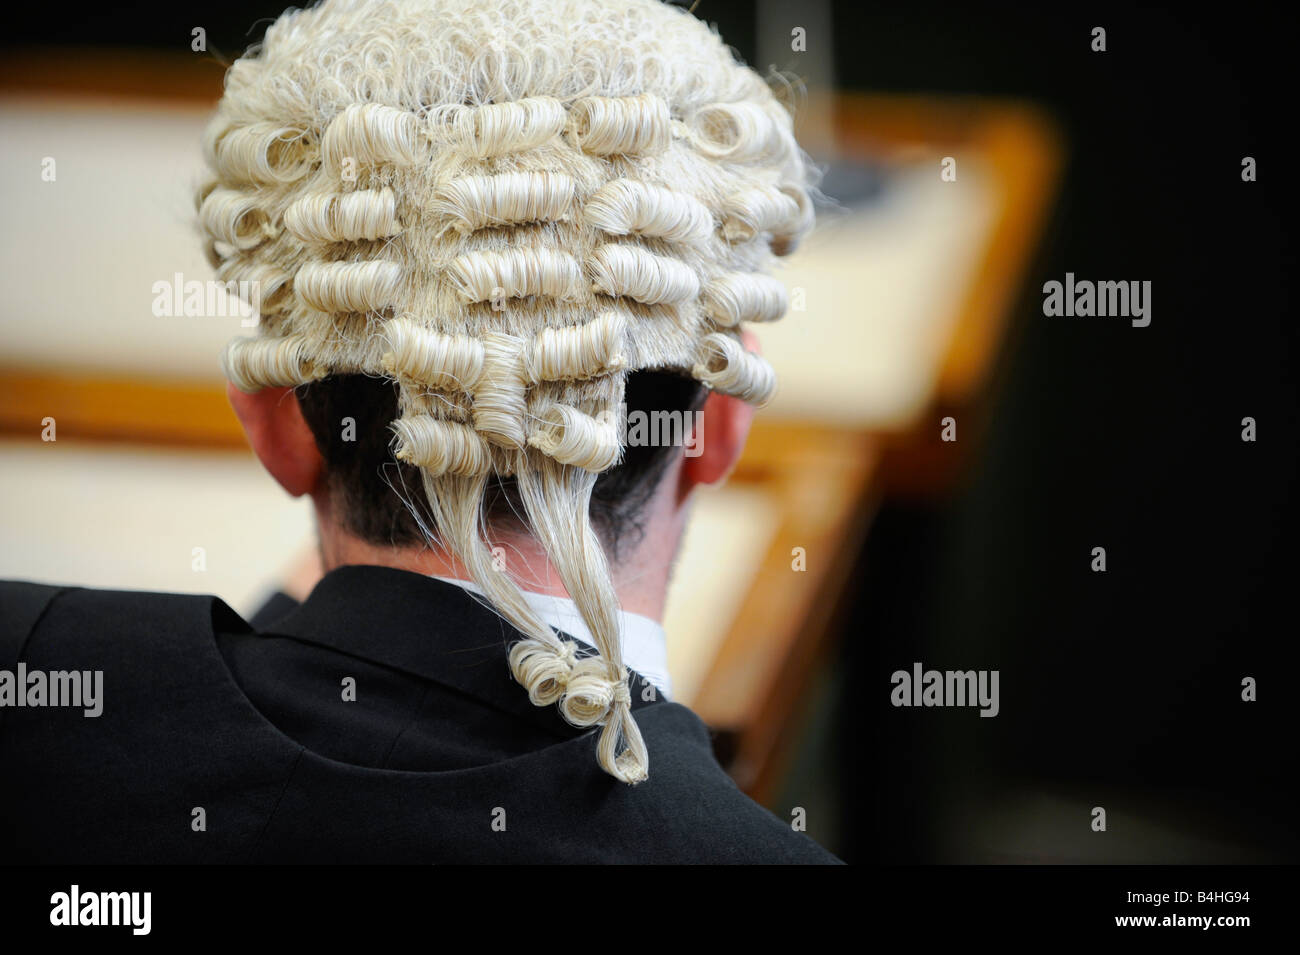 Generic Law court picture a member of the bar wearing barristers wig. Stock Photo